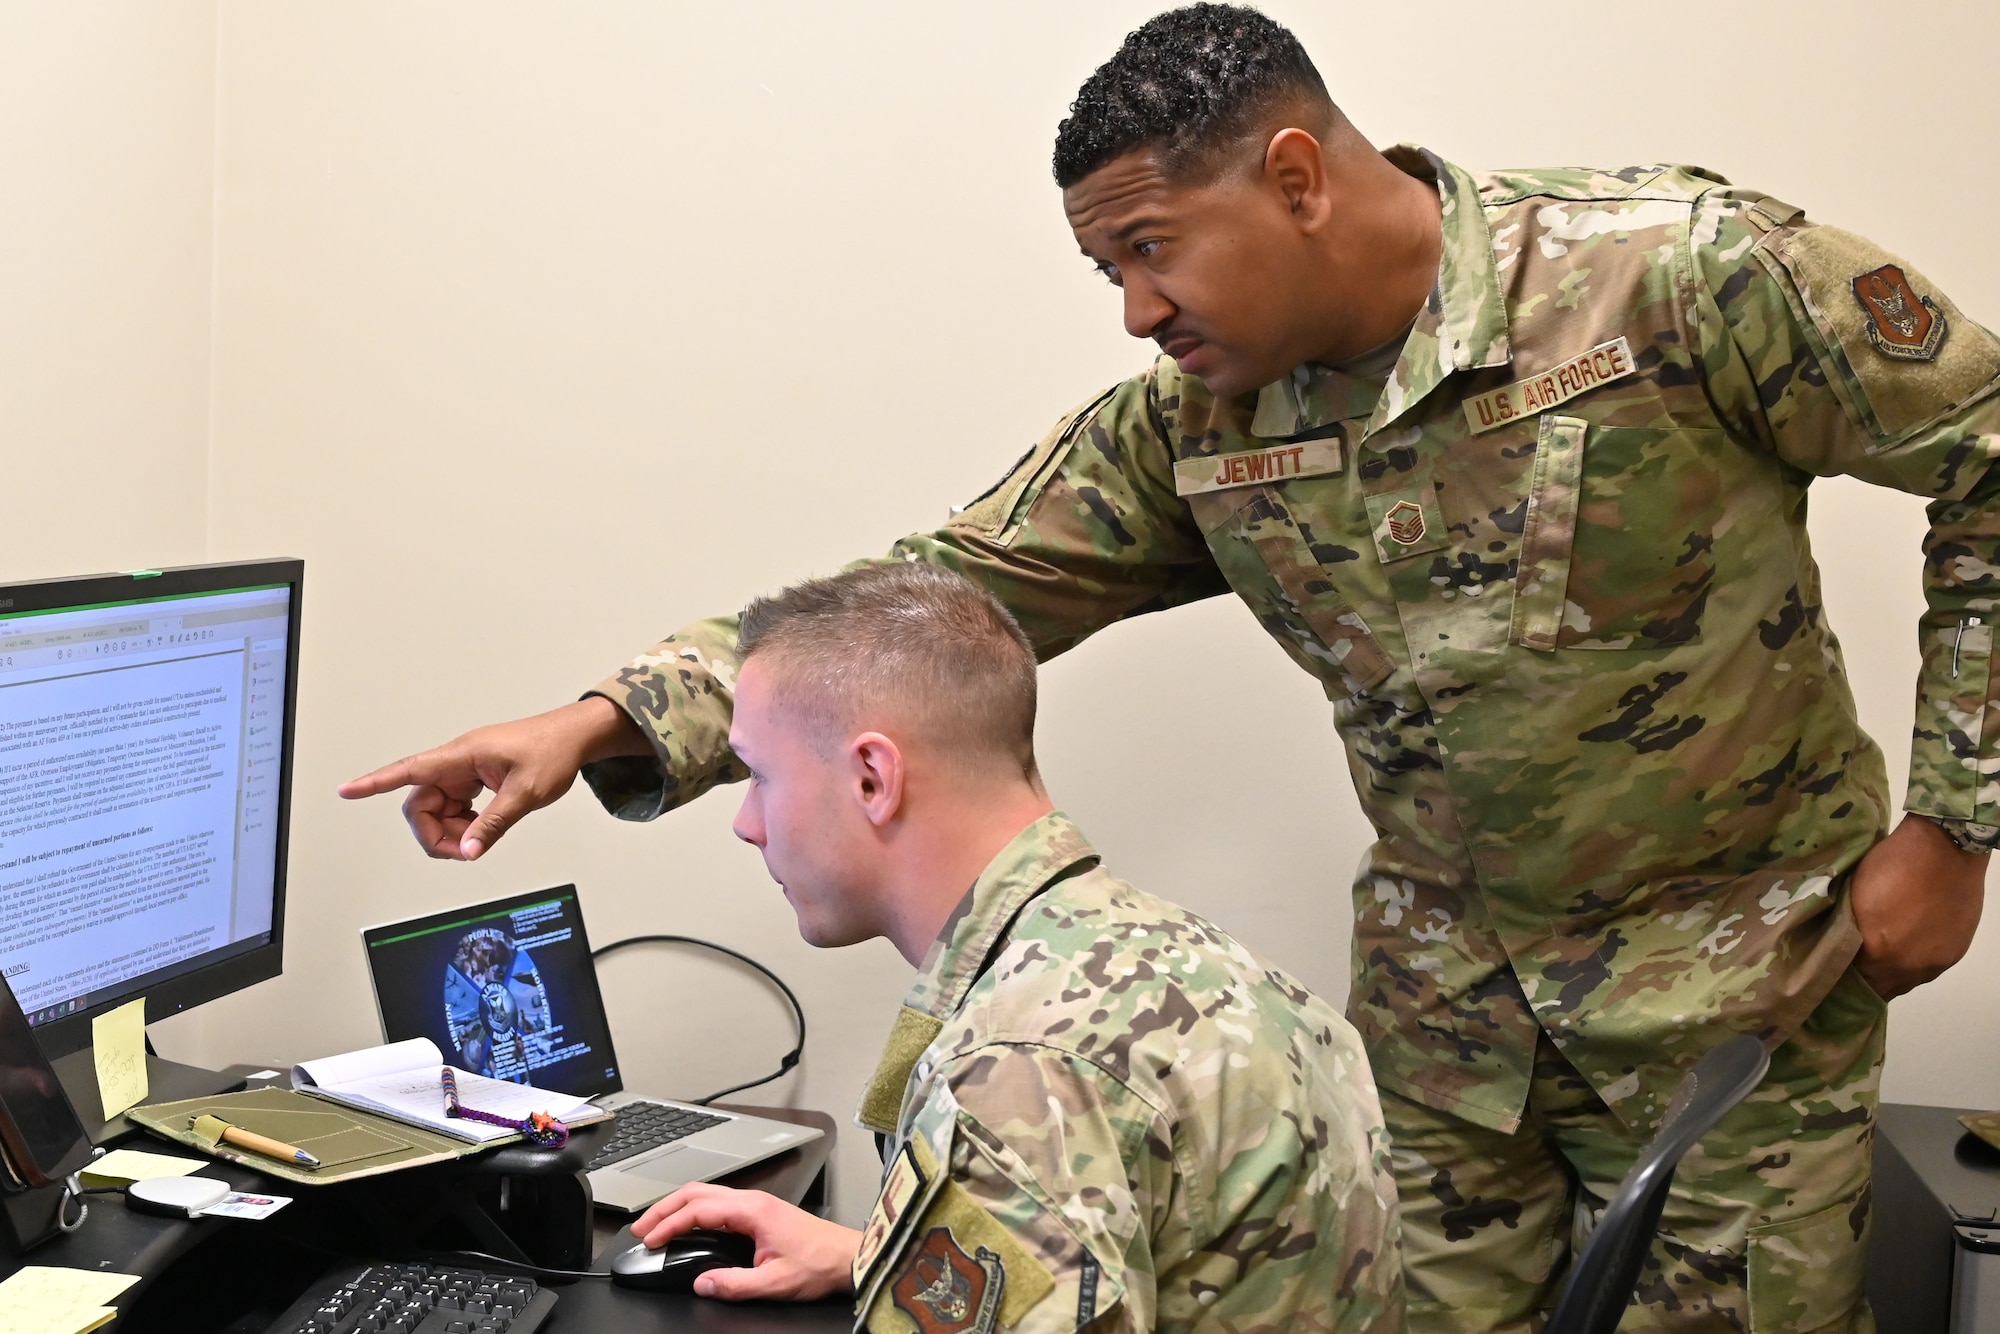 307 BW Talent Management Consultant, Master Sgt. Gavilan Jewitt assists an Airman through their reenlistment incentive paperwork on the computer.